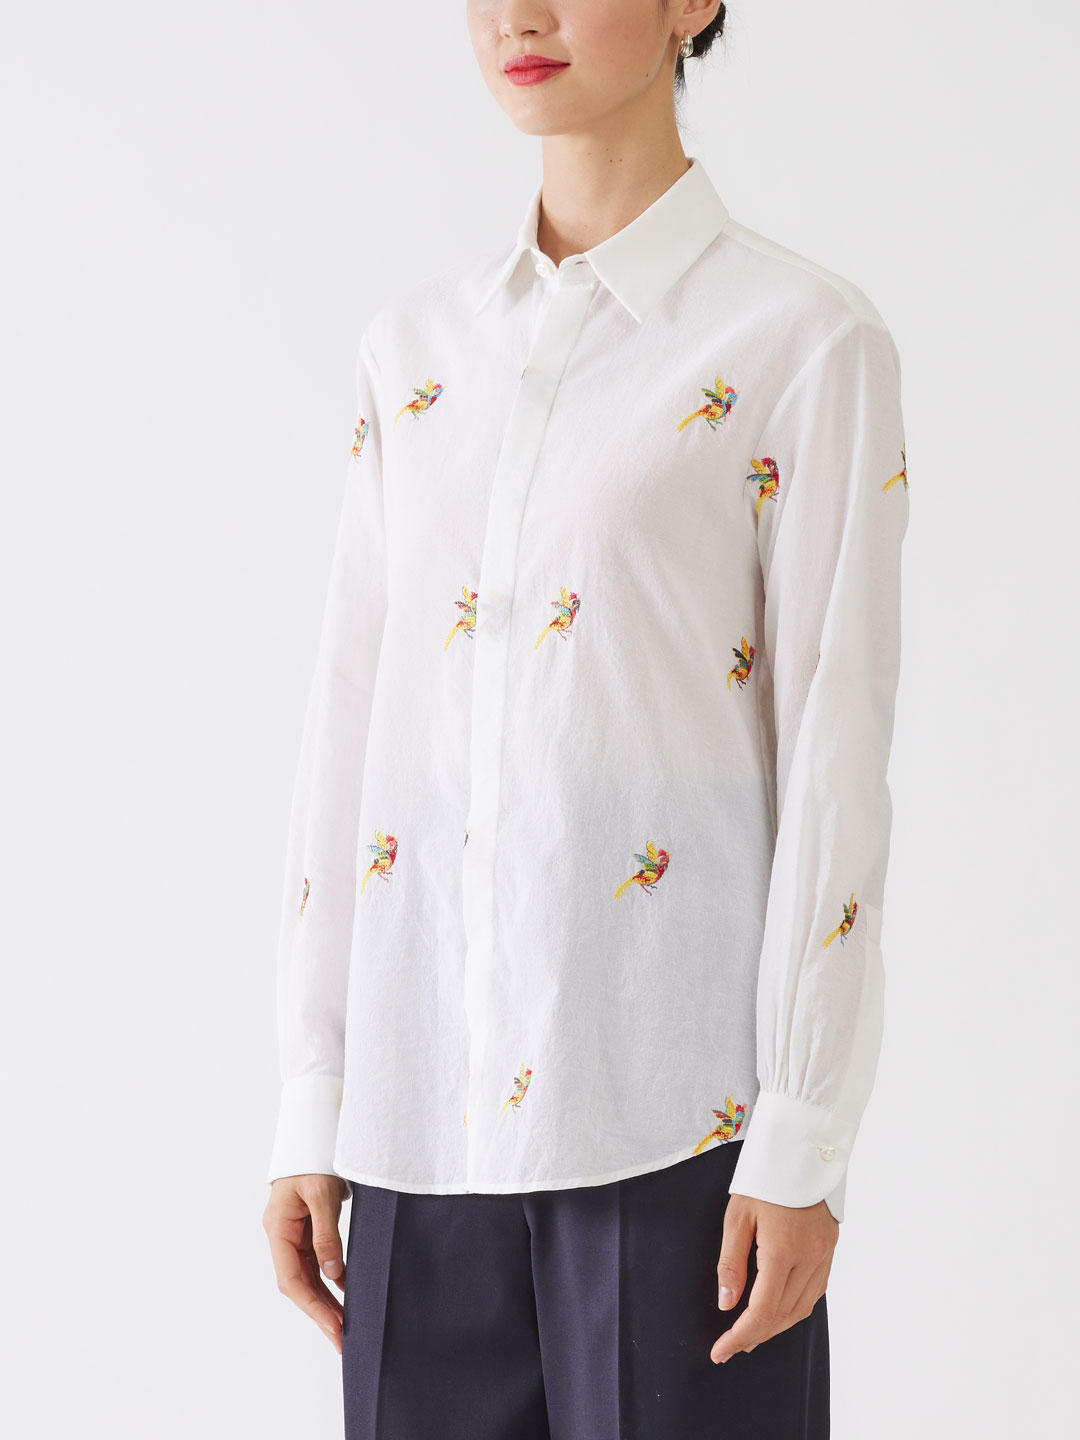 AUTHENTIQUE Embroidery Linen Blended Shirt - White